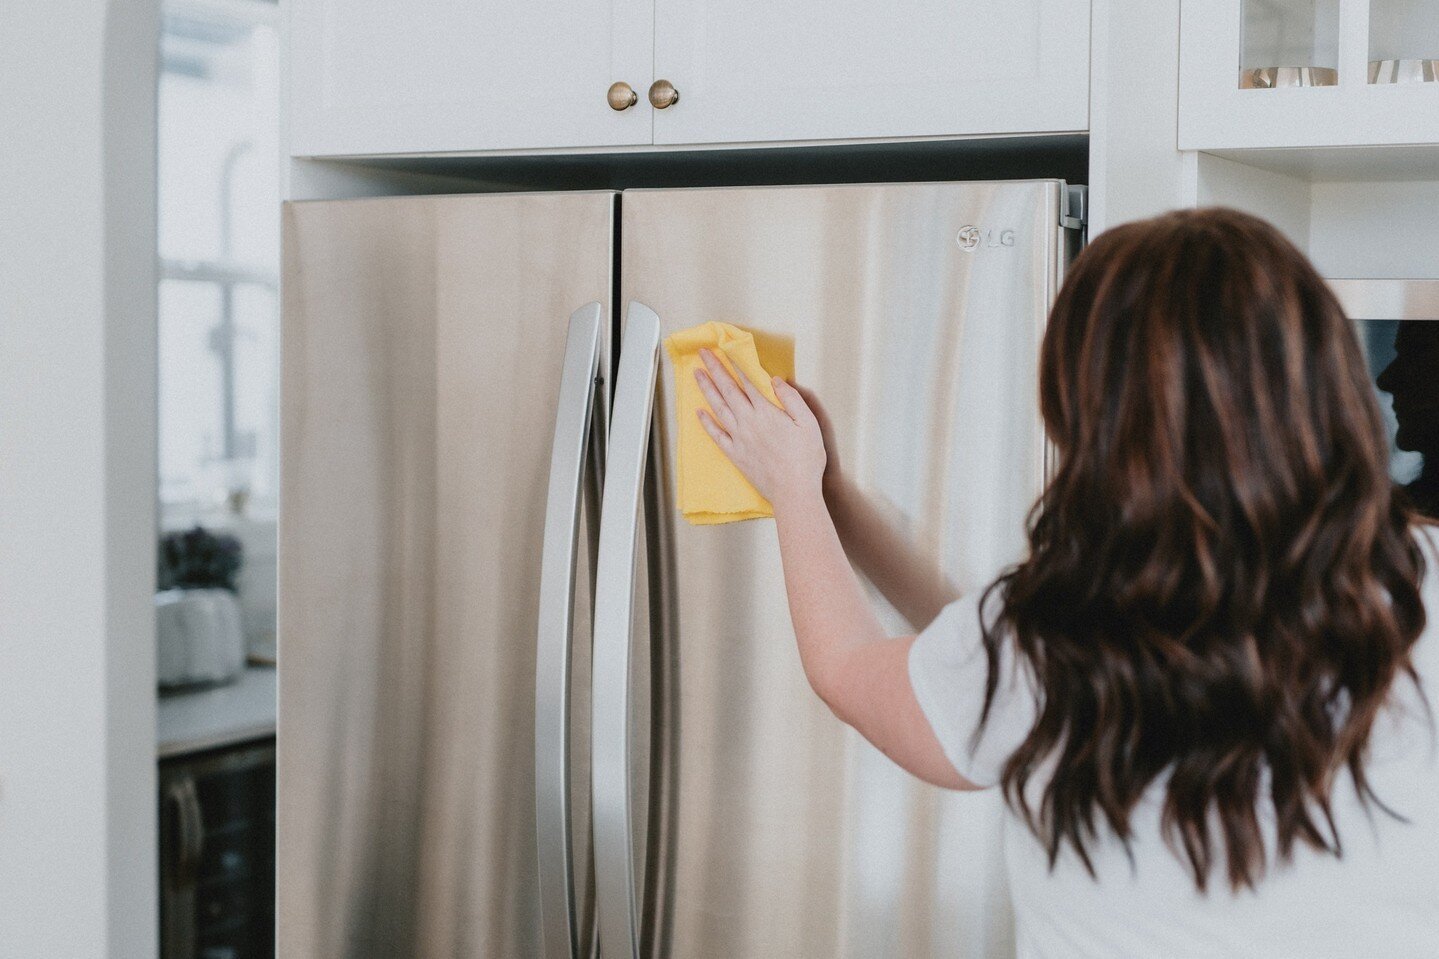 Stuck inside on this rainy, miserable day? Why not tackle the fridge? I know, it&rsquo;s a distigusting chore. One we even dread. ⁠
⁠
But after the expired food is cleared out and the stains are scrubbed, opening your fridge to sparkle and shine make